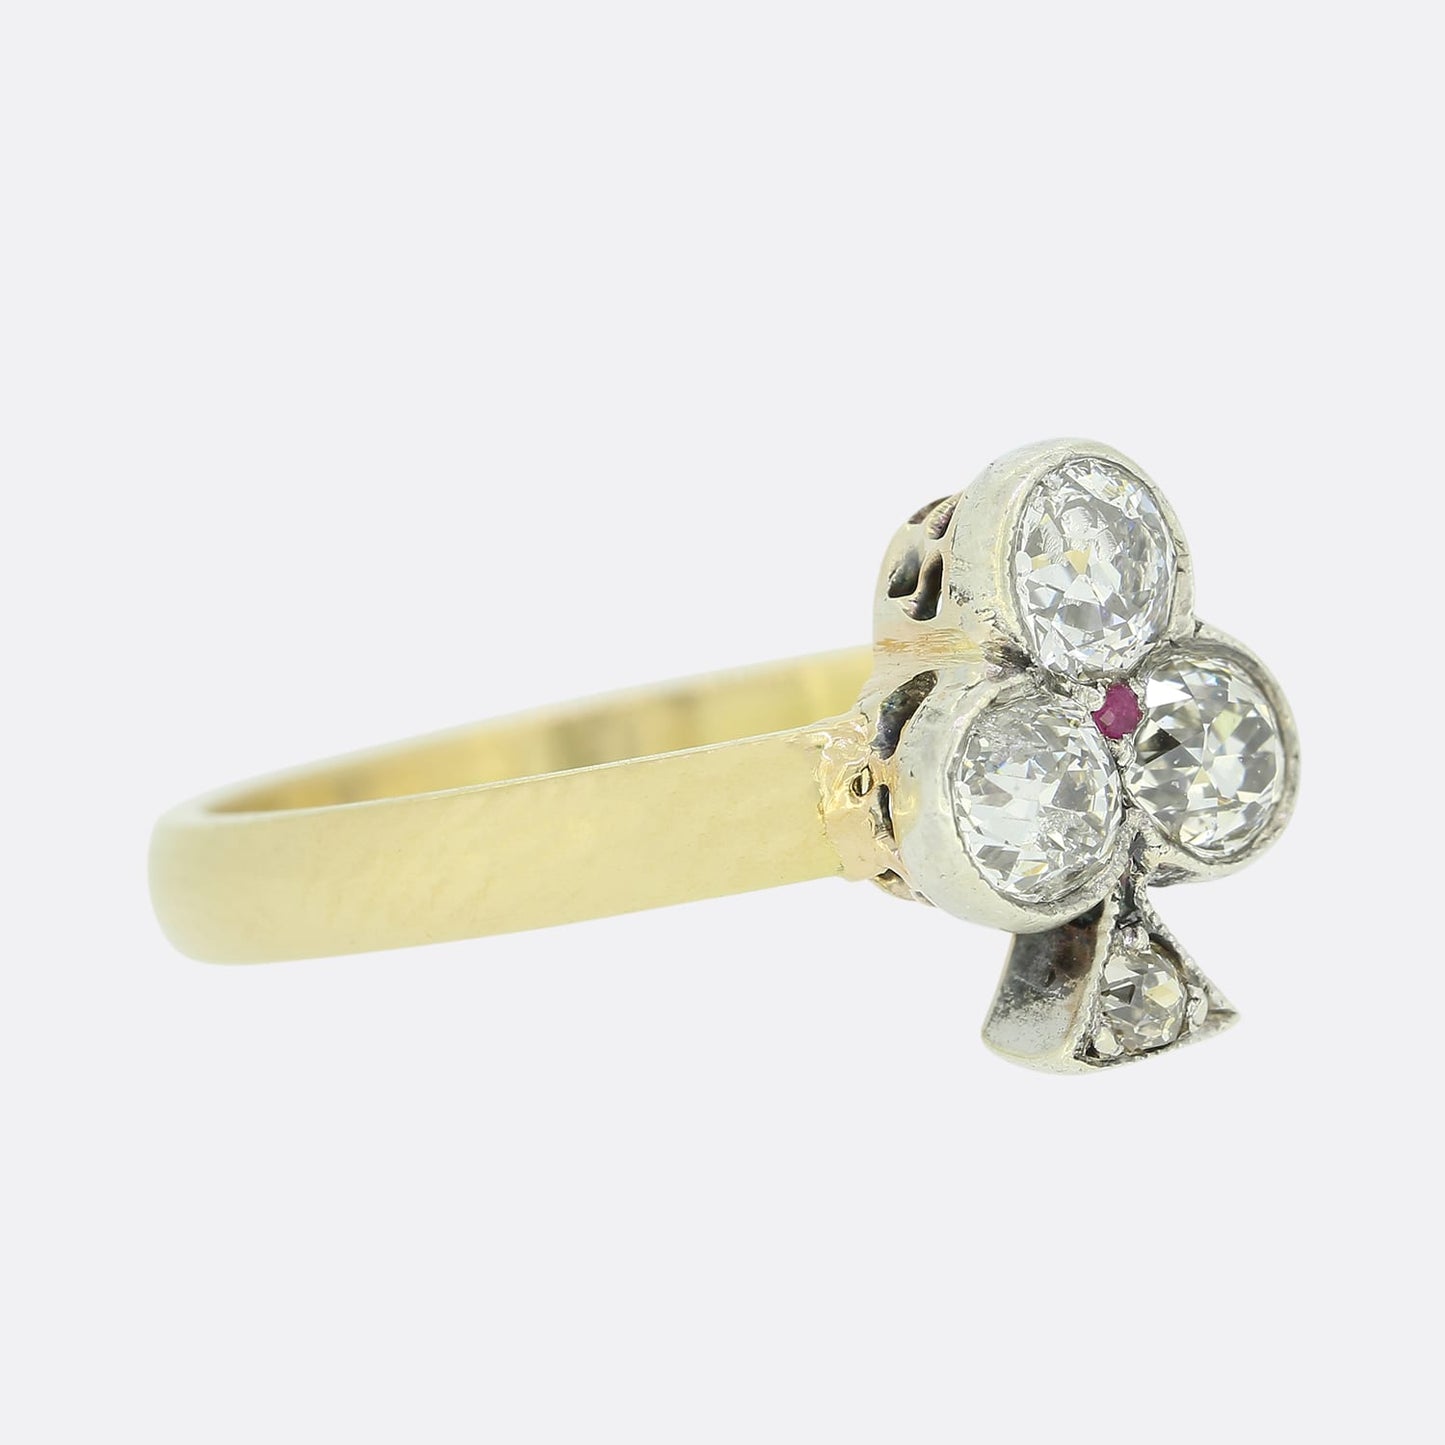 0.62 Carat Old Cut Diamond and Ruby Clover Ring